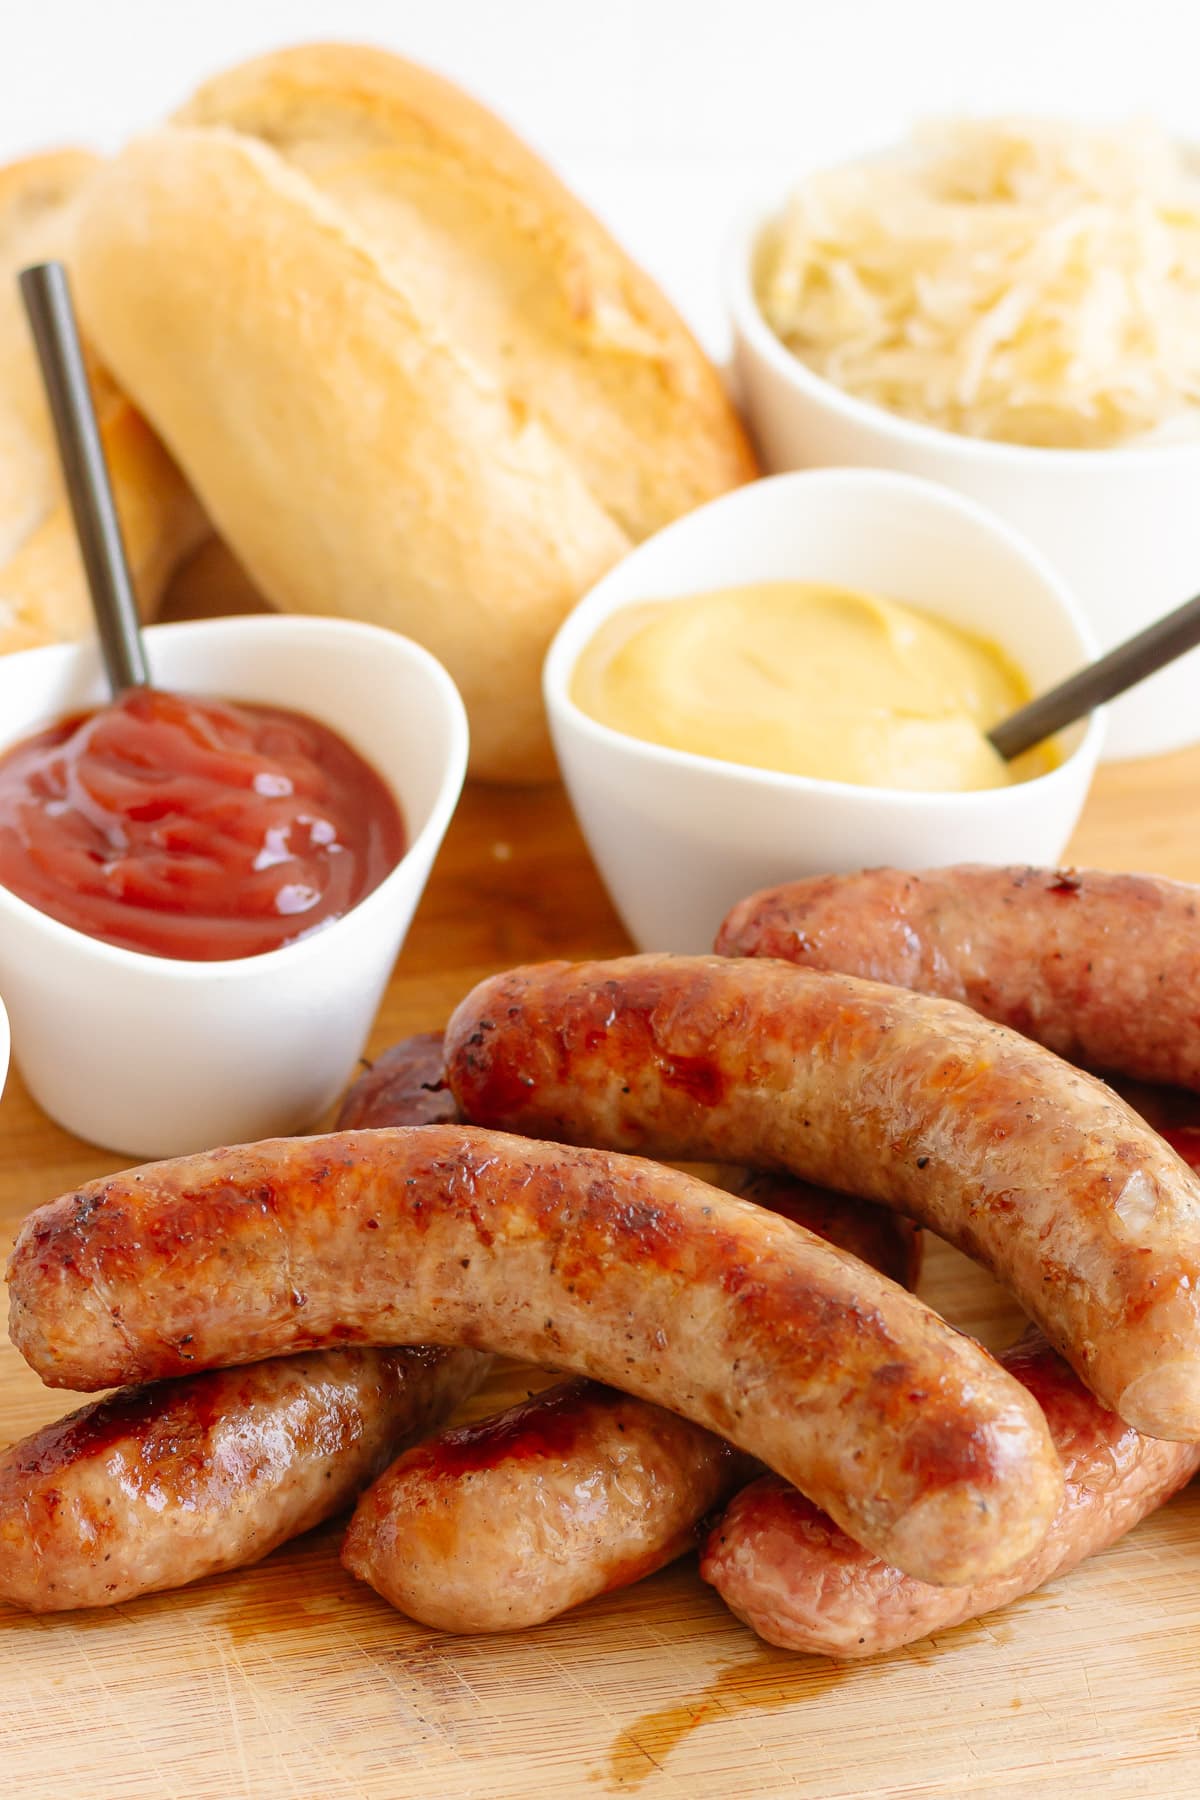 Grilled bratwurst on a wooden board with a pile of crusty buns and small bowls of toppings.